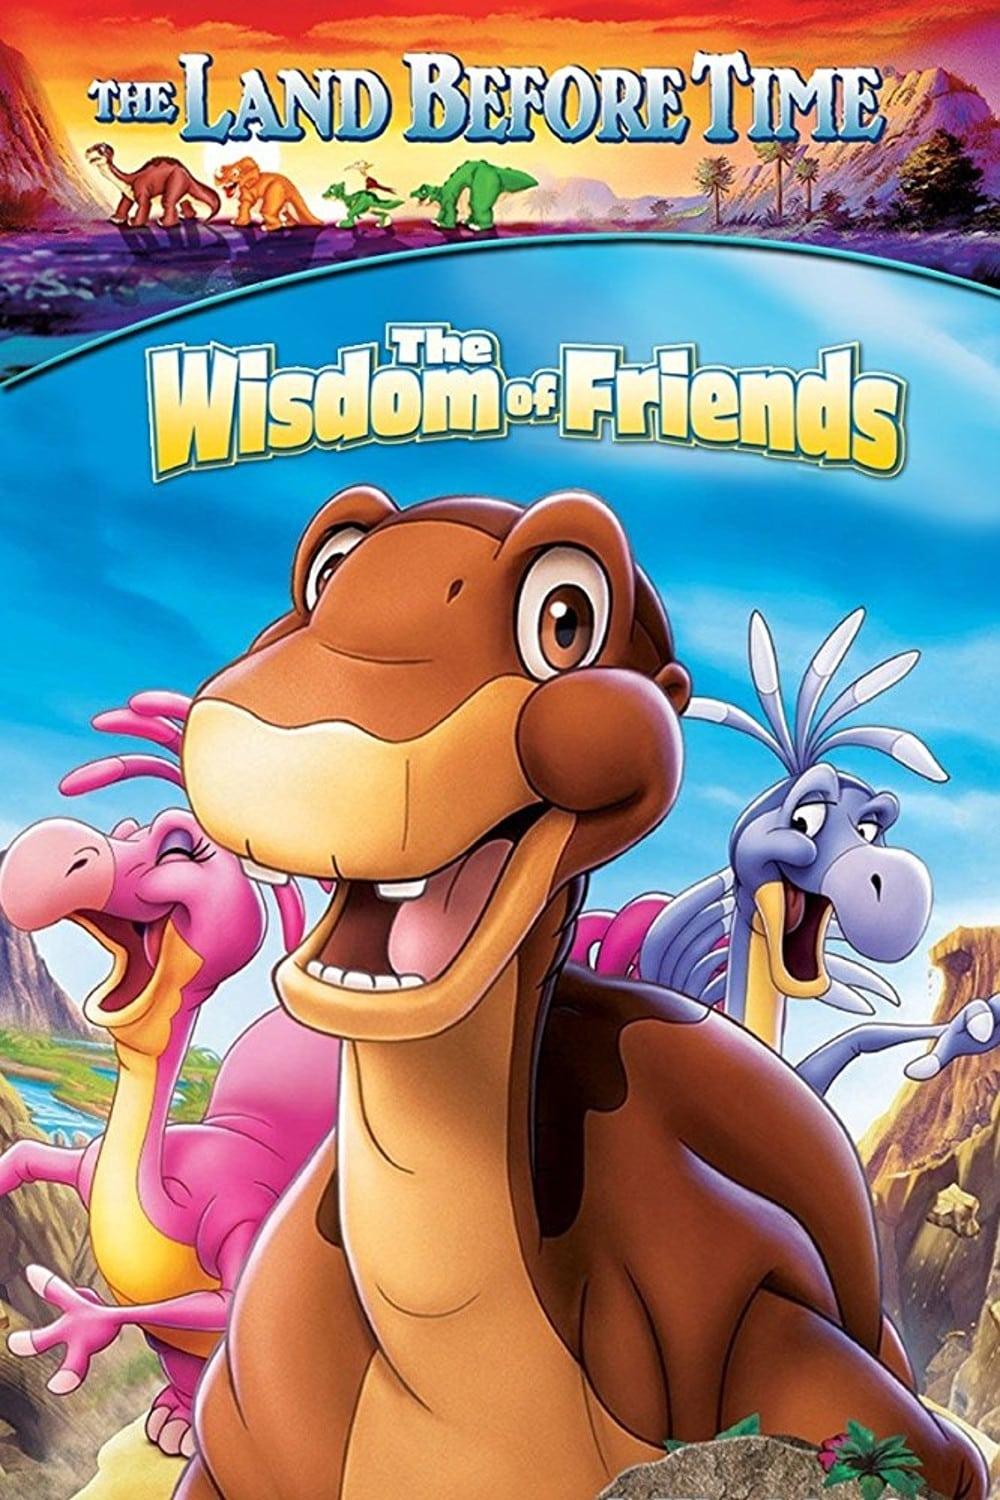 The Land Before Time XIII: The Wisdom of Friends poster